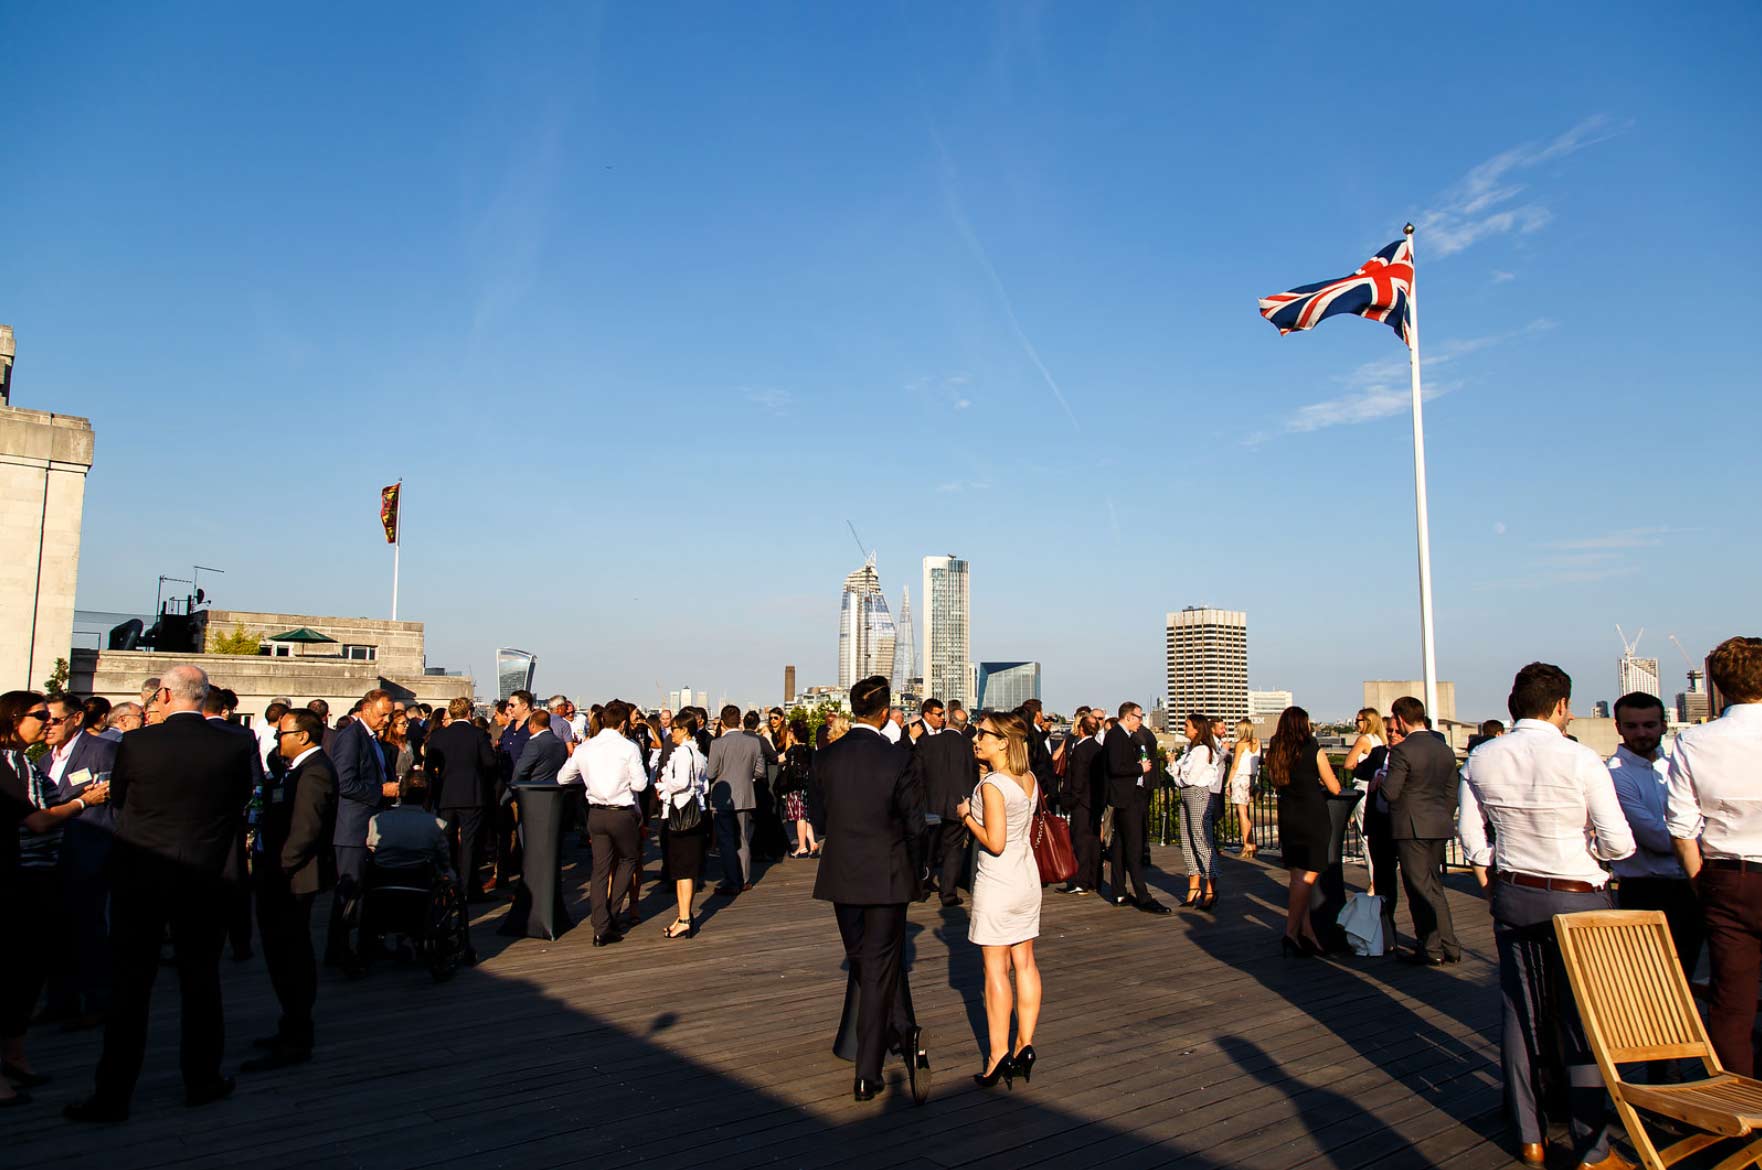 Corporate party event rooftop london